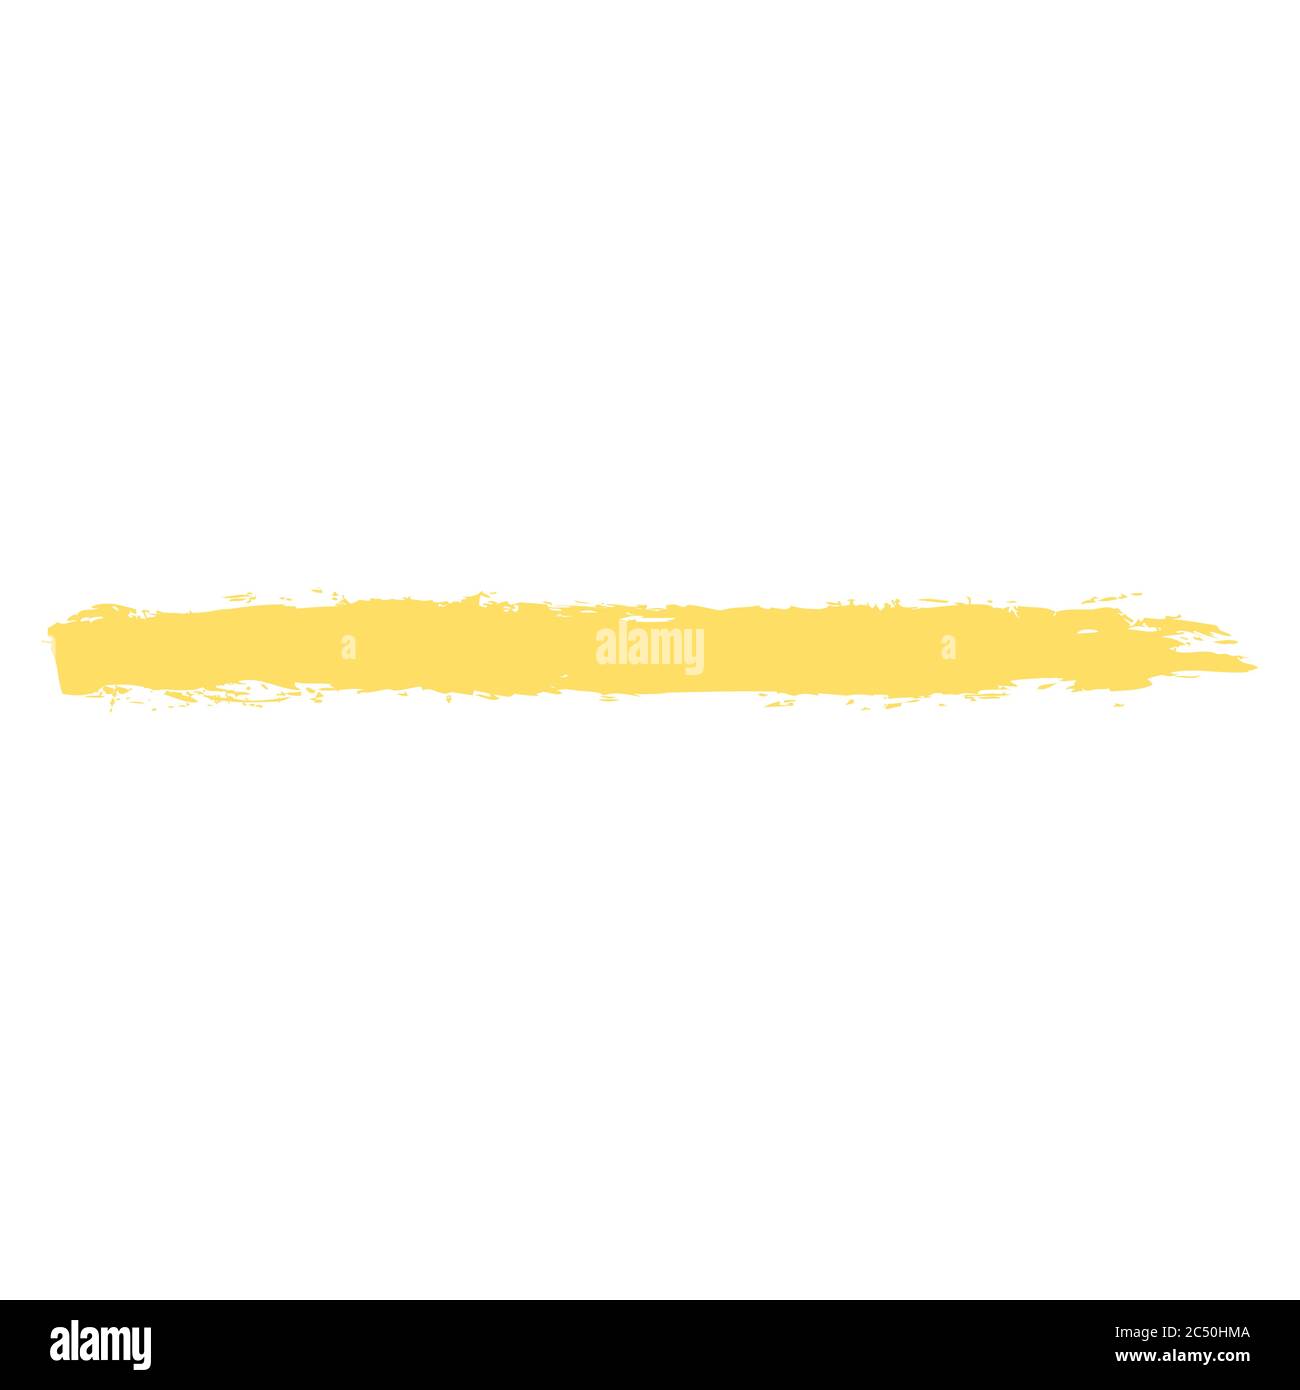 Brush stroke left a yellow paint imprint. Paintbrush texture in brushstroke form. Recolorable shape isolated from background. Vector illustration Stock Vector